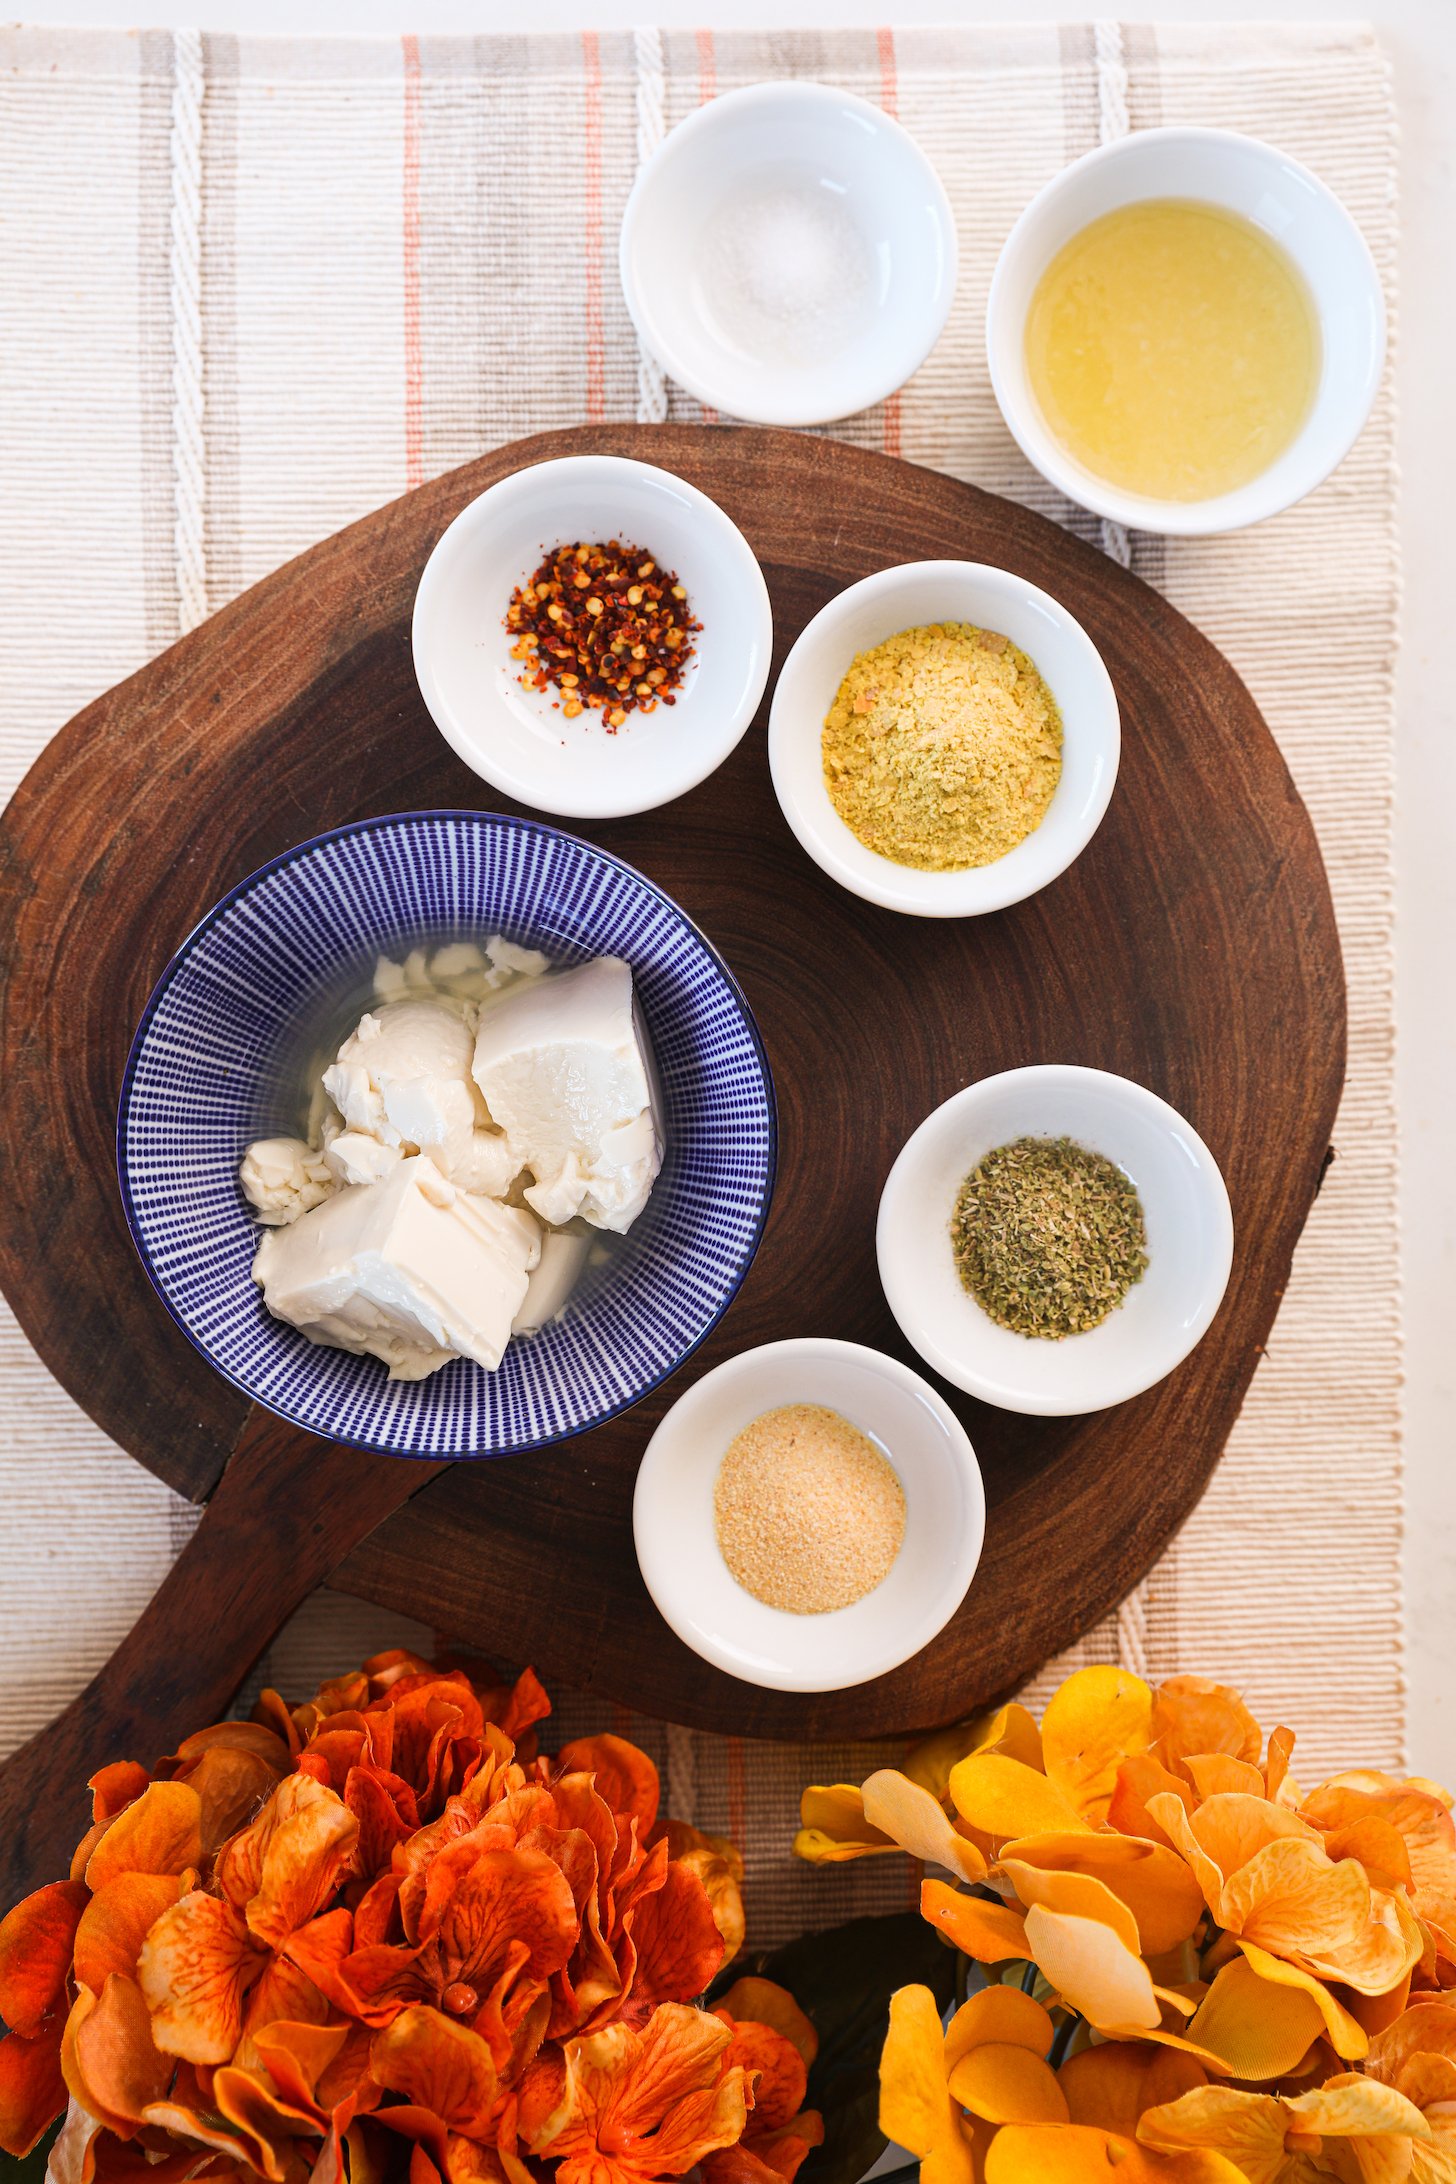 A selection of food ingredients arranged on a wooden board including soft tofu, yeast and spices with bright yellow flowers.